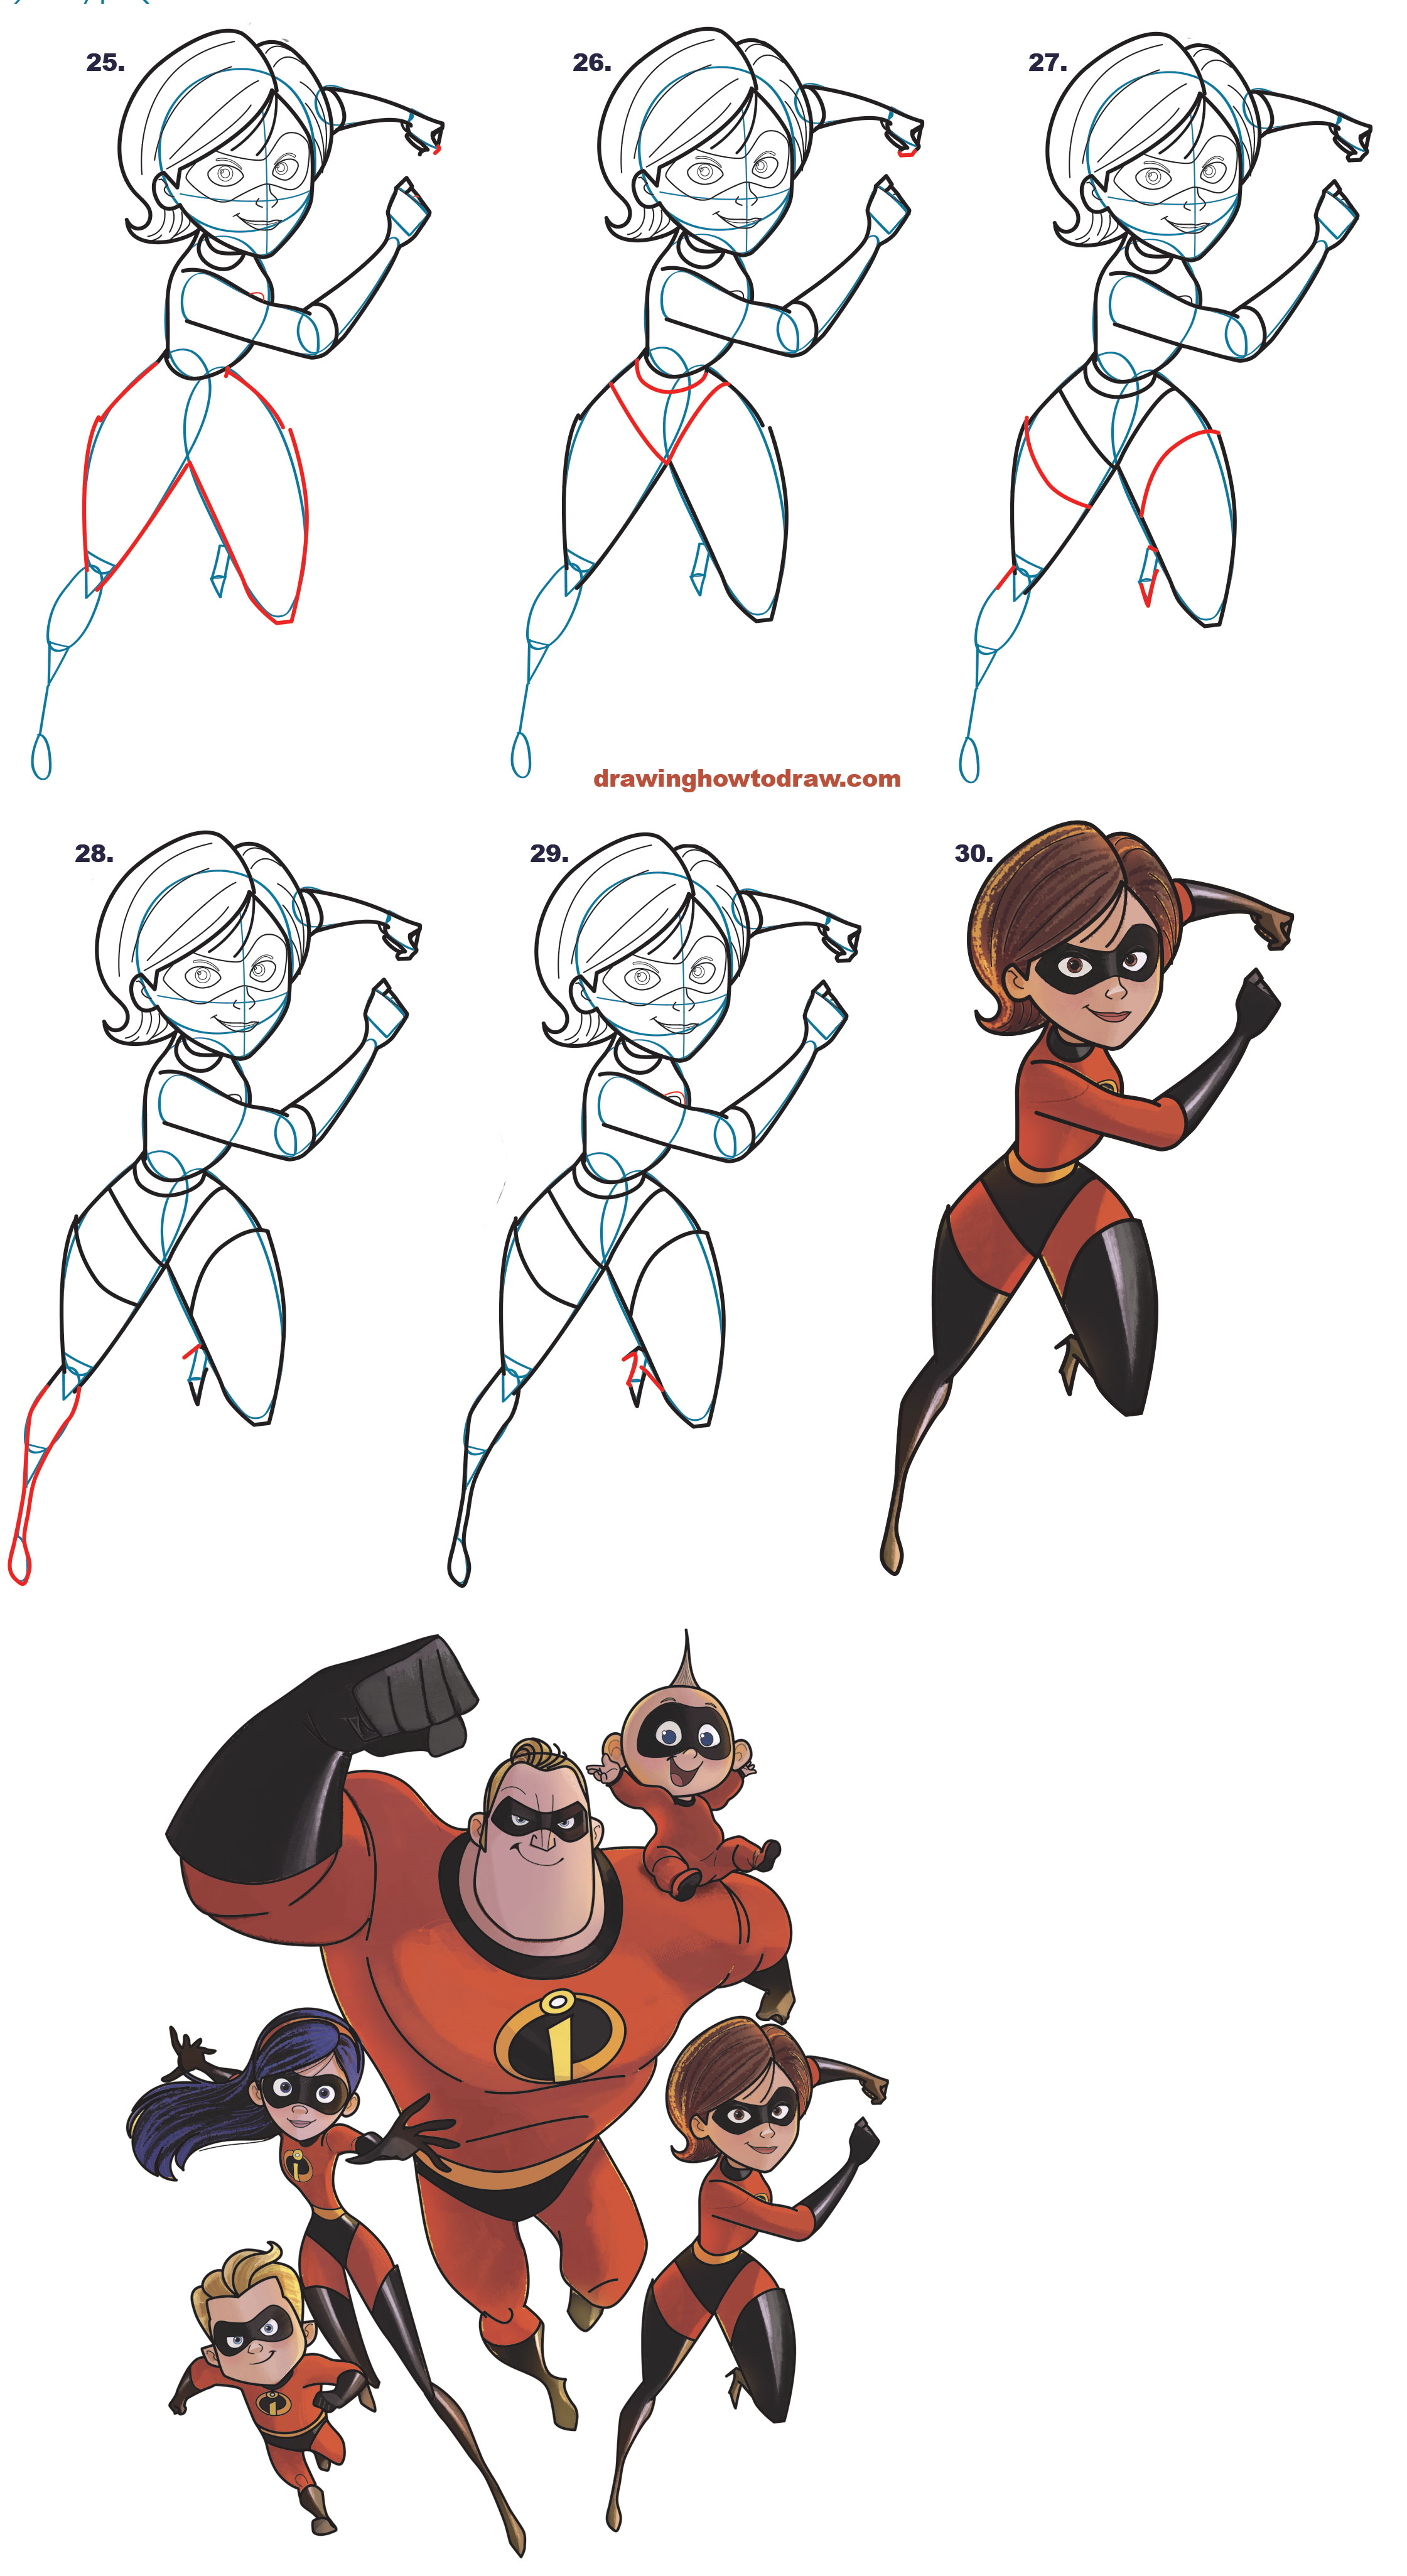 Learn How to Draw Elastigirl, the Mom, from The Incredibles (Part 4 of Drawing The Incredibles 2 Family) Easy Step by Step Tutorial for Kids & Beginners